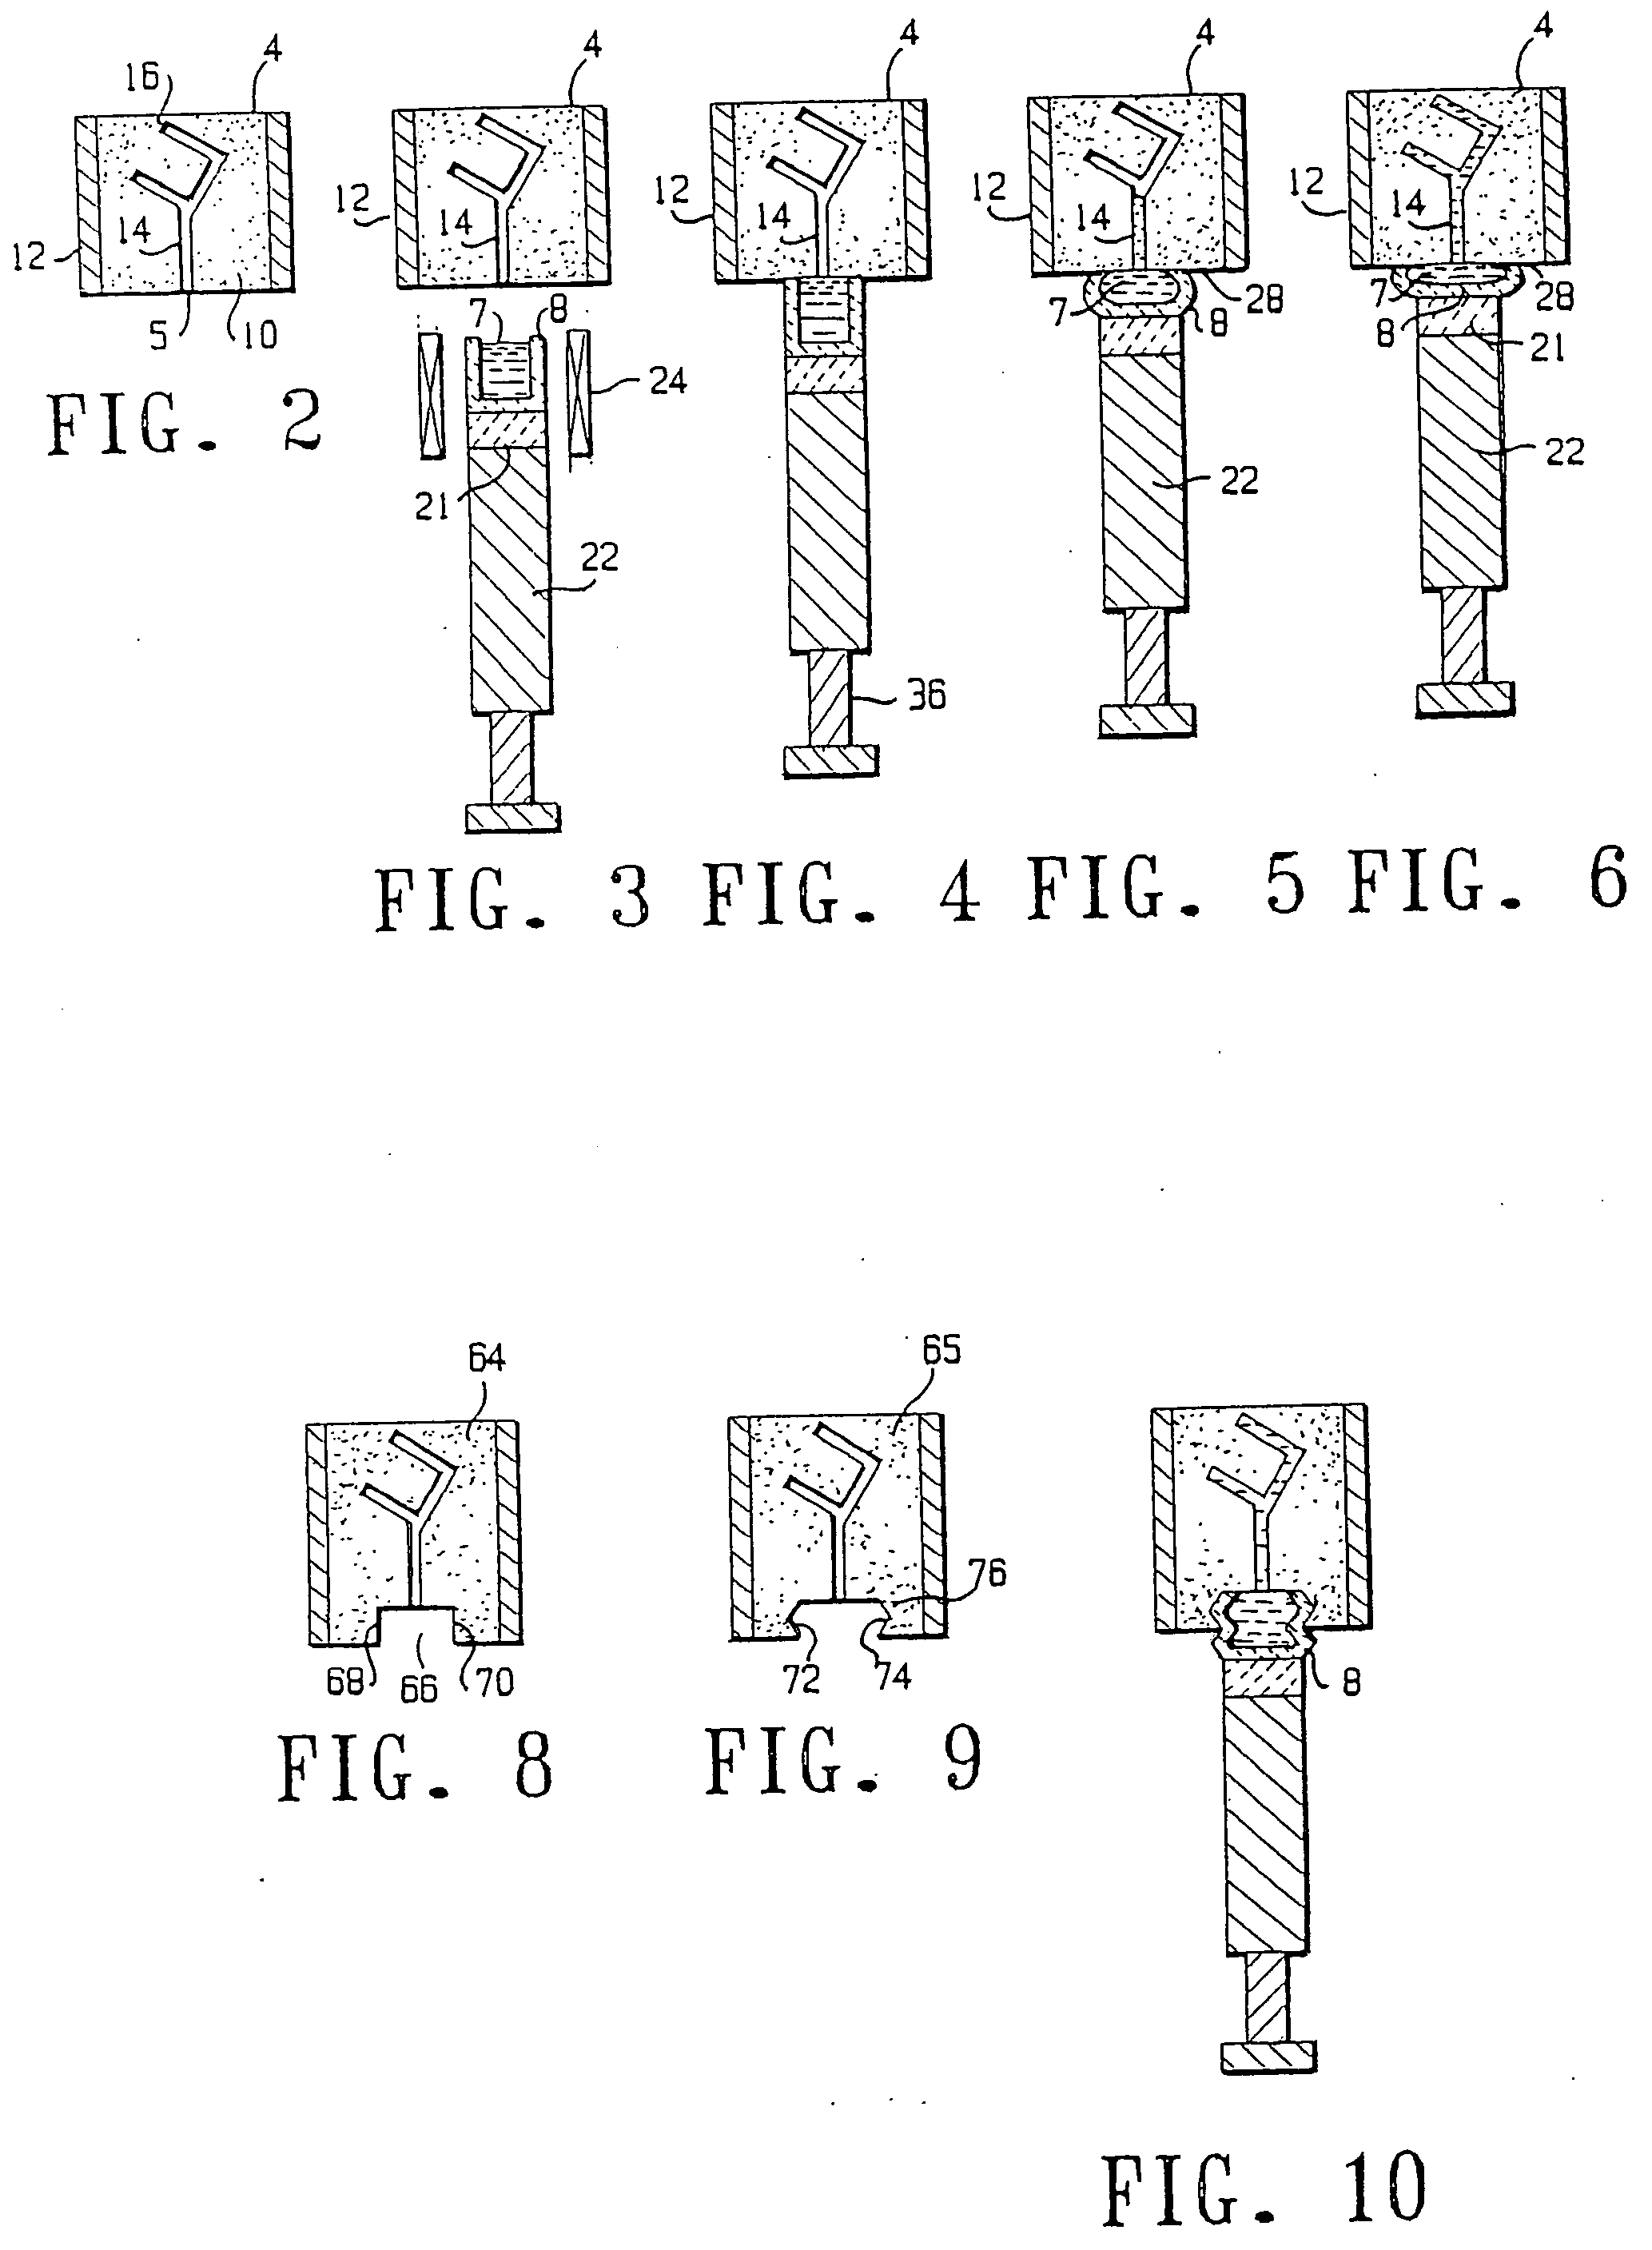 Method for molding dental restorations and related apparatus